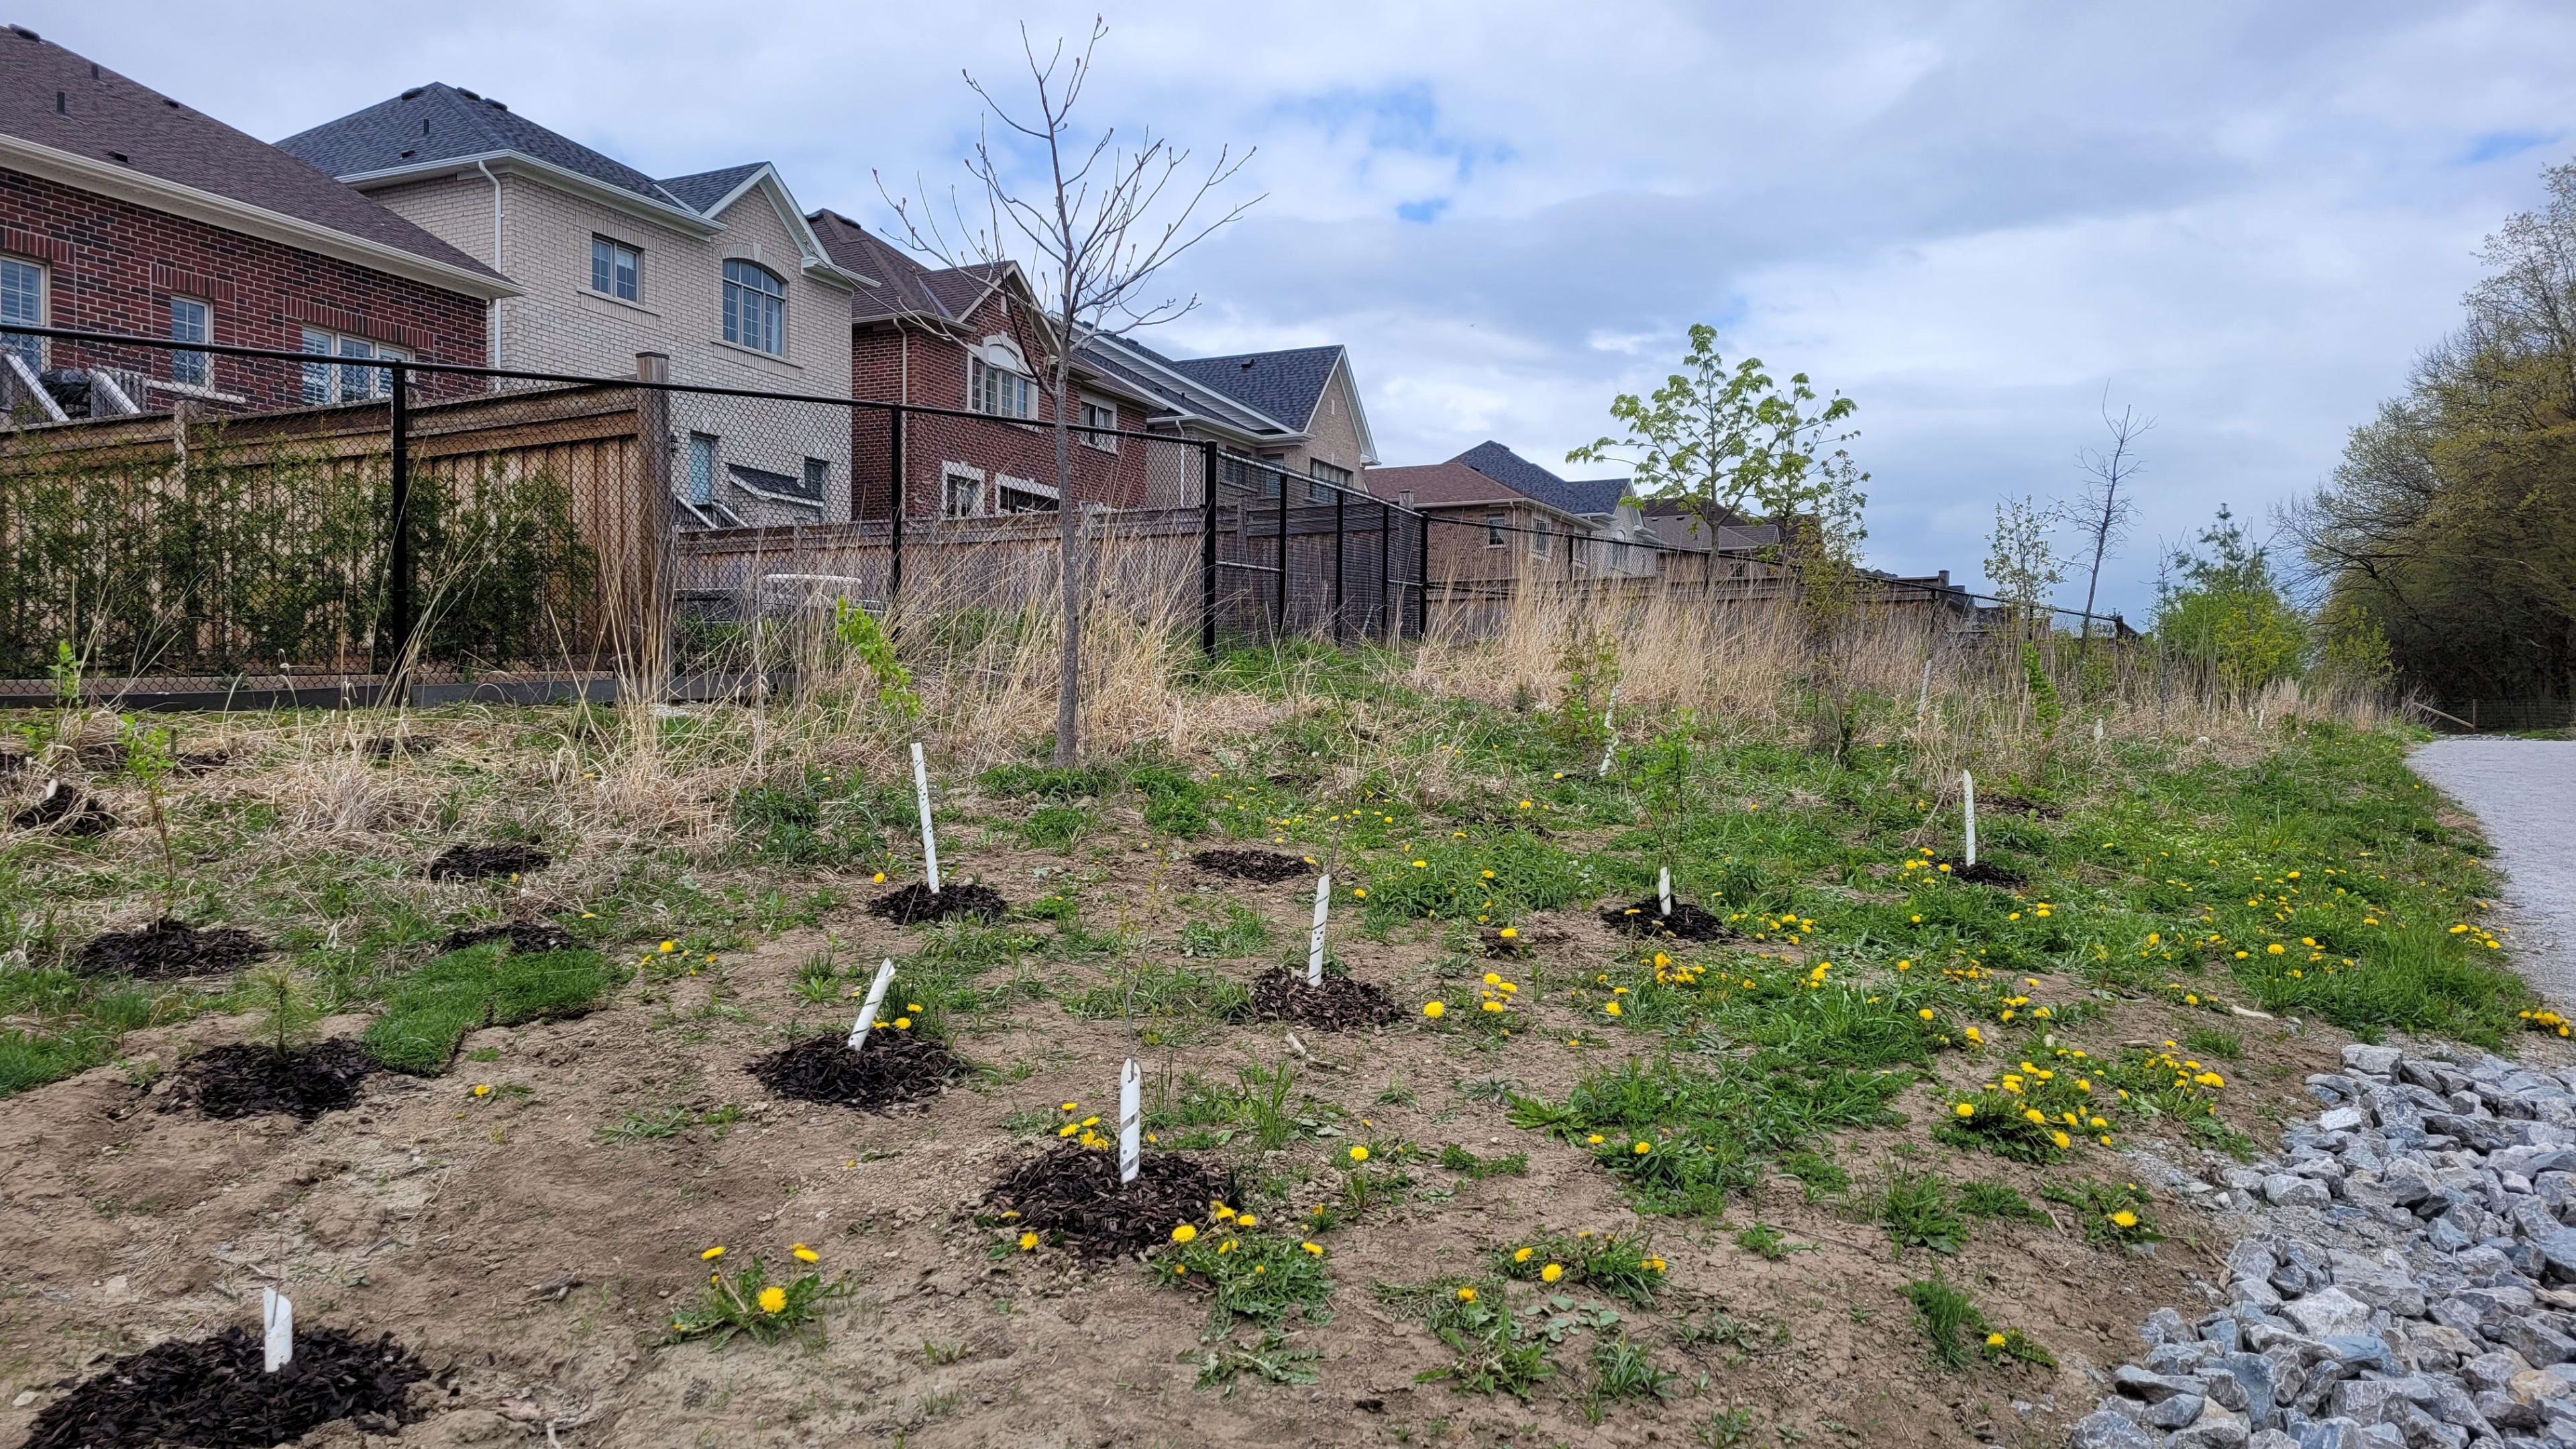 Metrolinx spreading the roots of GO Expansion as spring compensation tree planting continues acro...